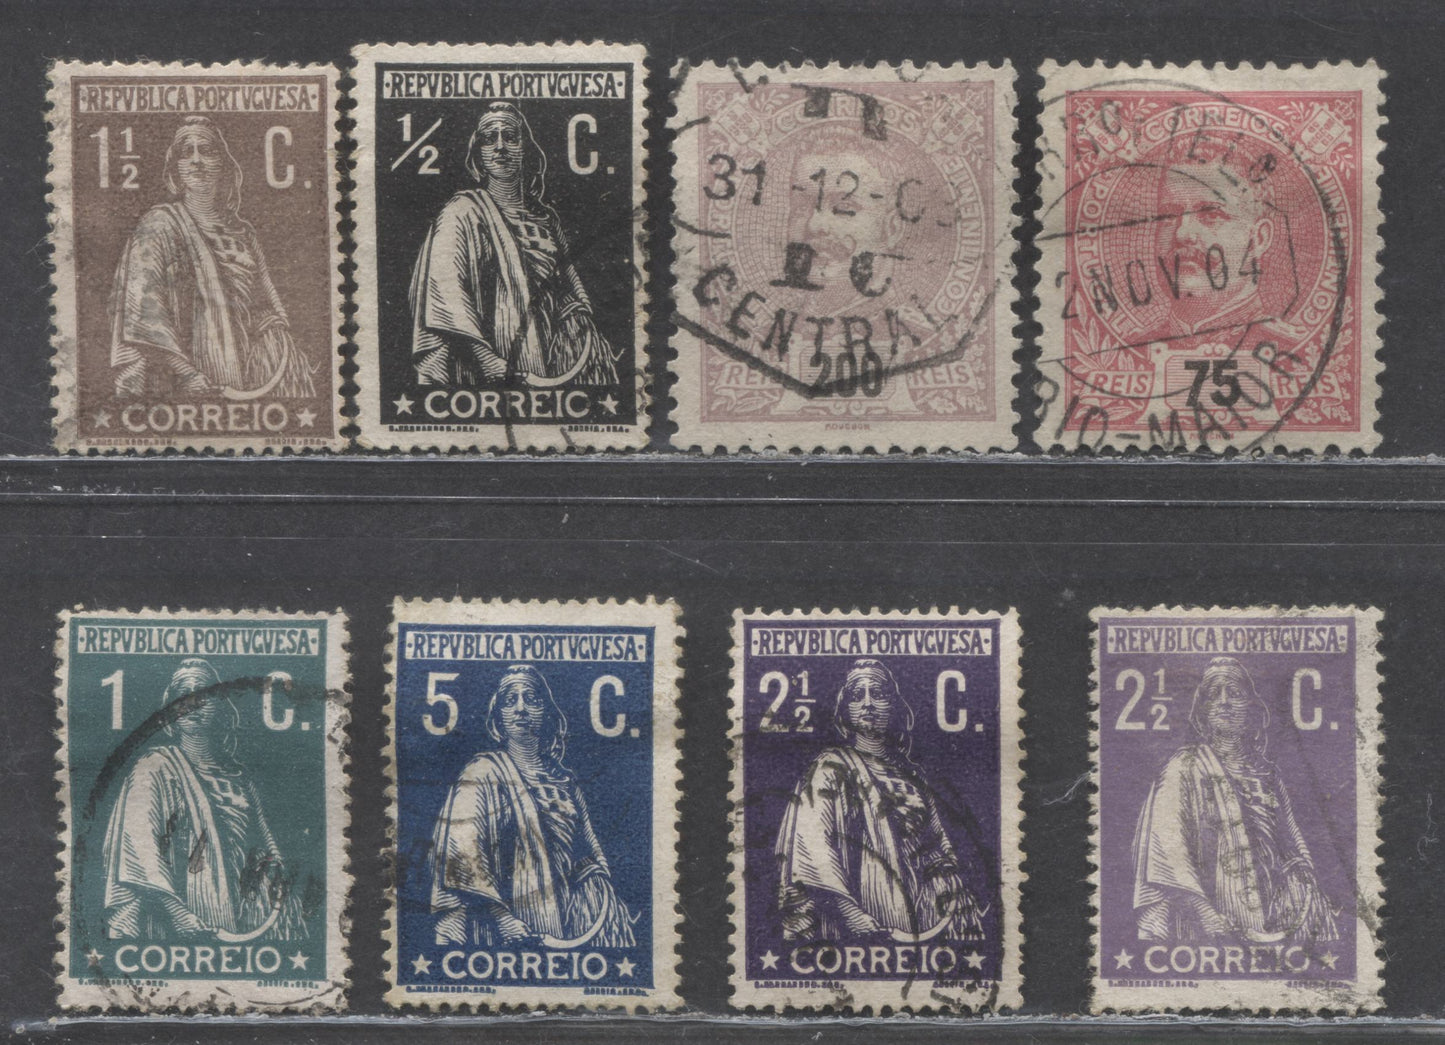 Lot 126 Portugal SC#121/213 1898-1915 Ceres Definitives, On Chalky paper, Perf 15 x 14, 8 Fine/Very Fine Used Singles, Click on Listing to See ALL Pictures, 2022 Scott Classic Cat. $41.05 USD